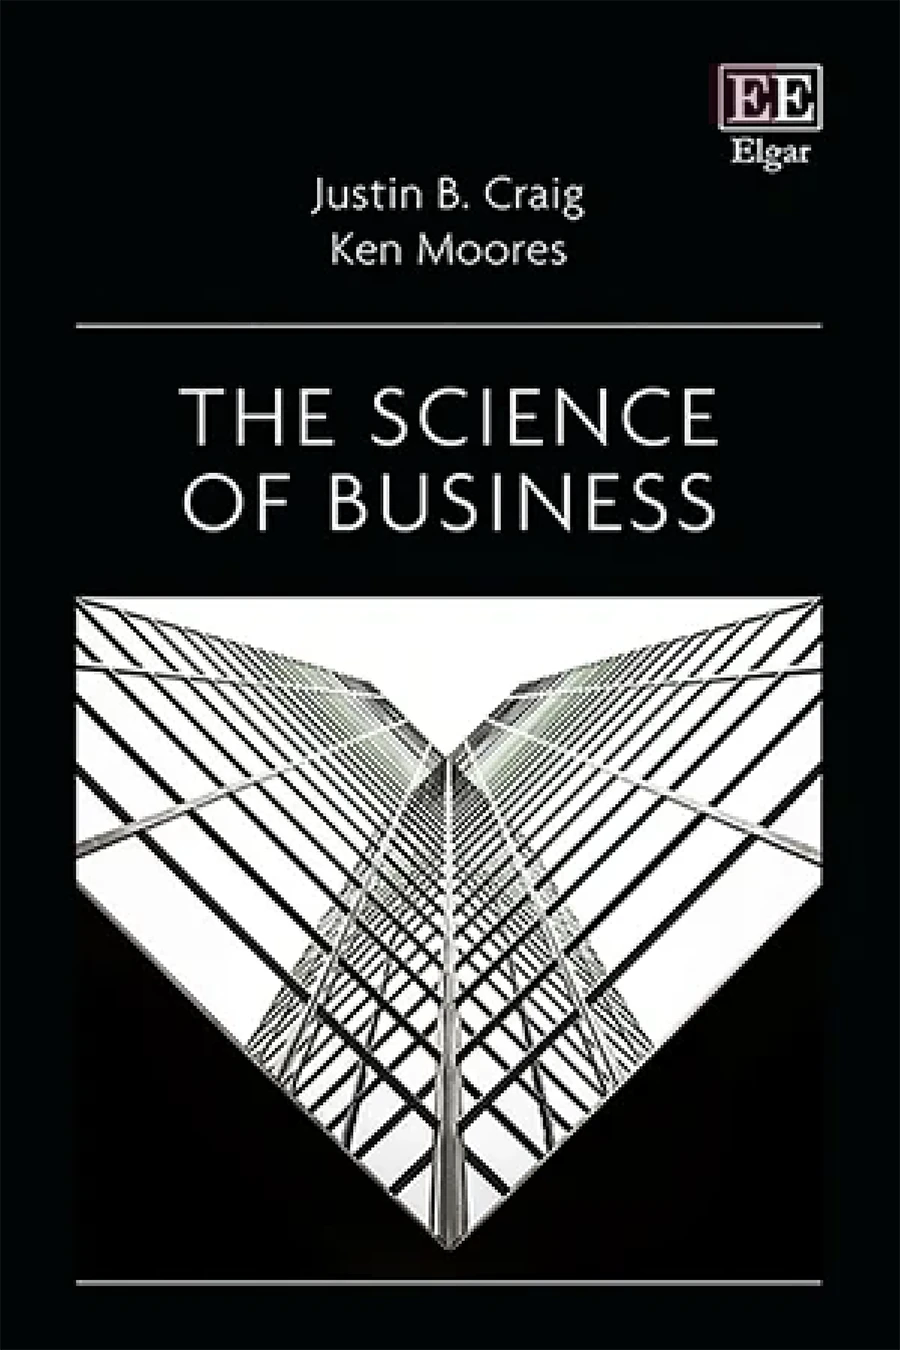 The Science of Business by Justin Craig and Ken Moores